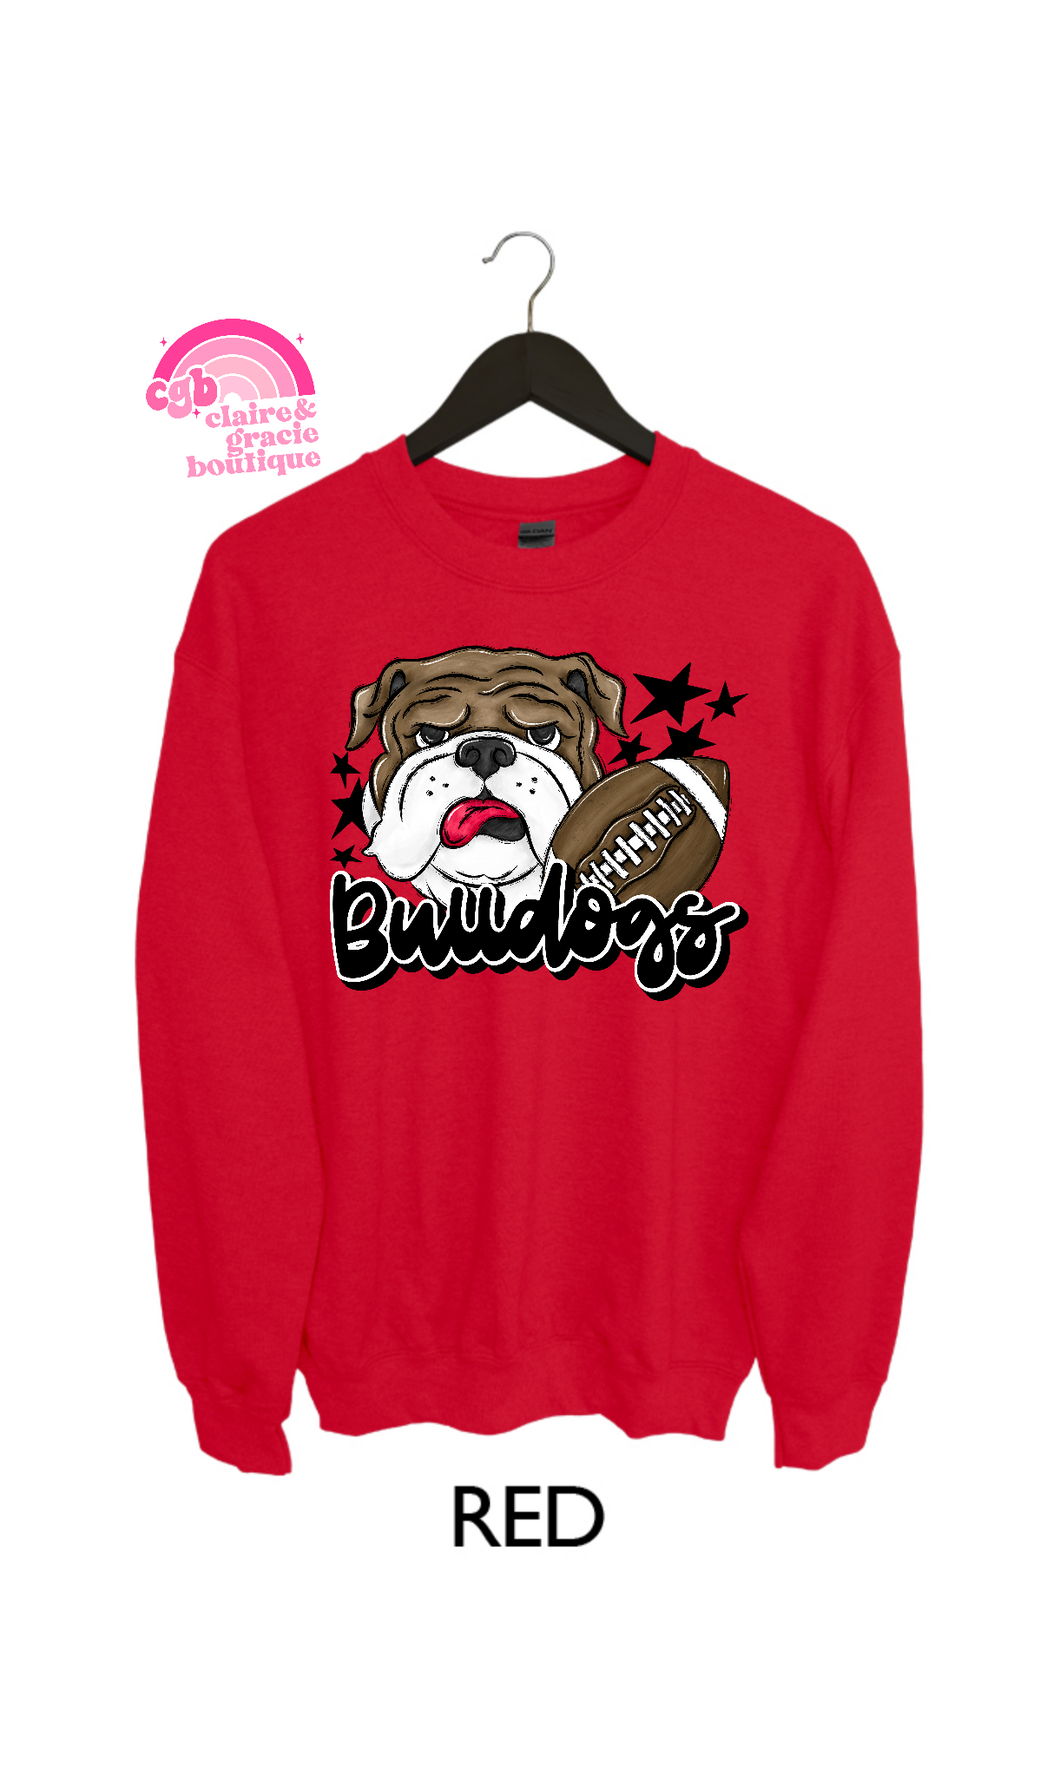 Bulldogs Red Tee or Sweatshirt | Choose your color